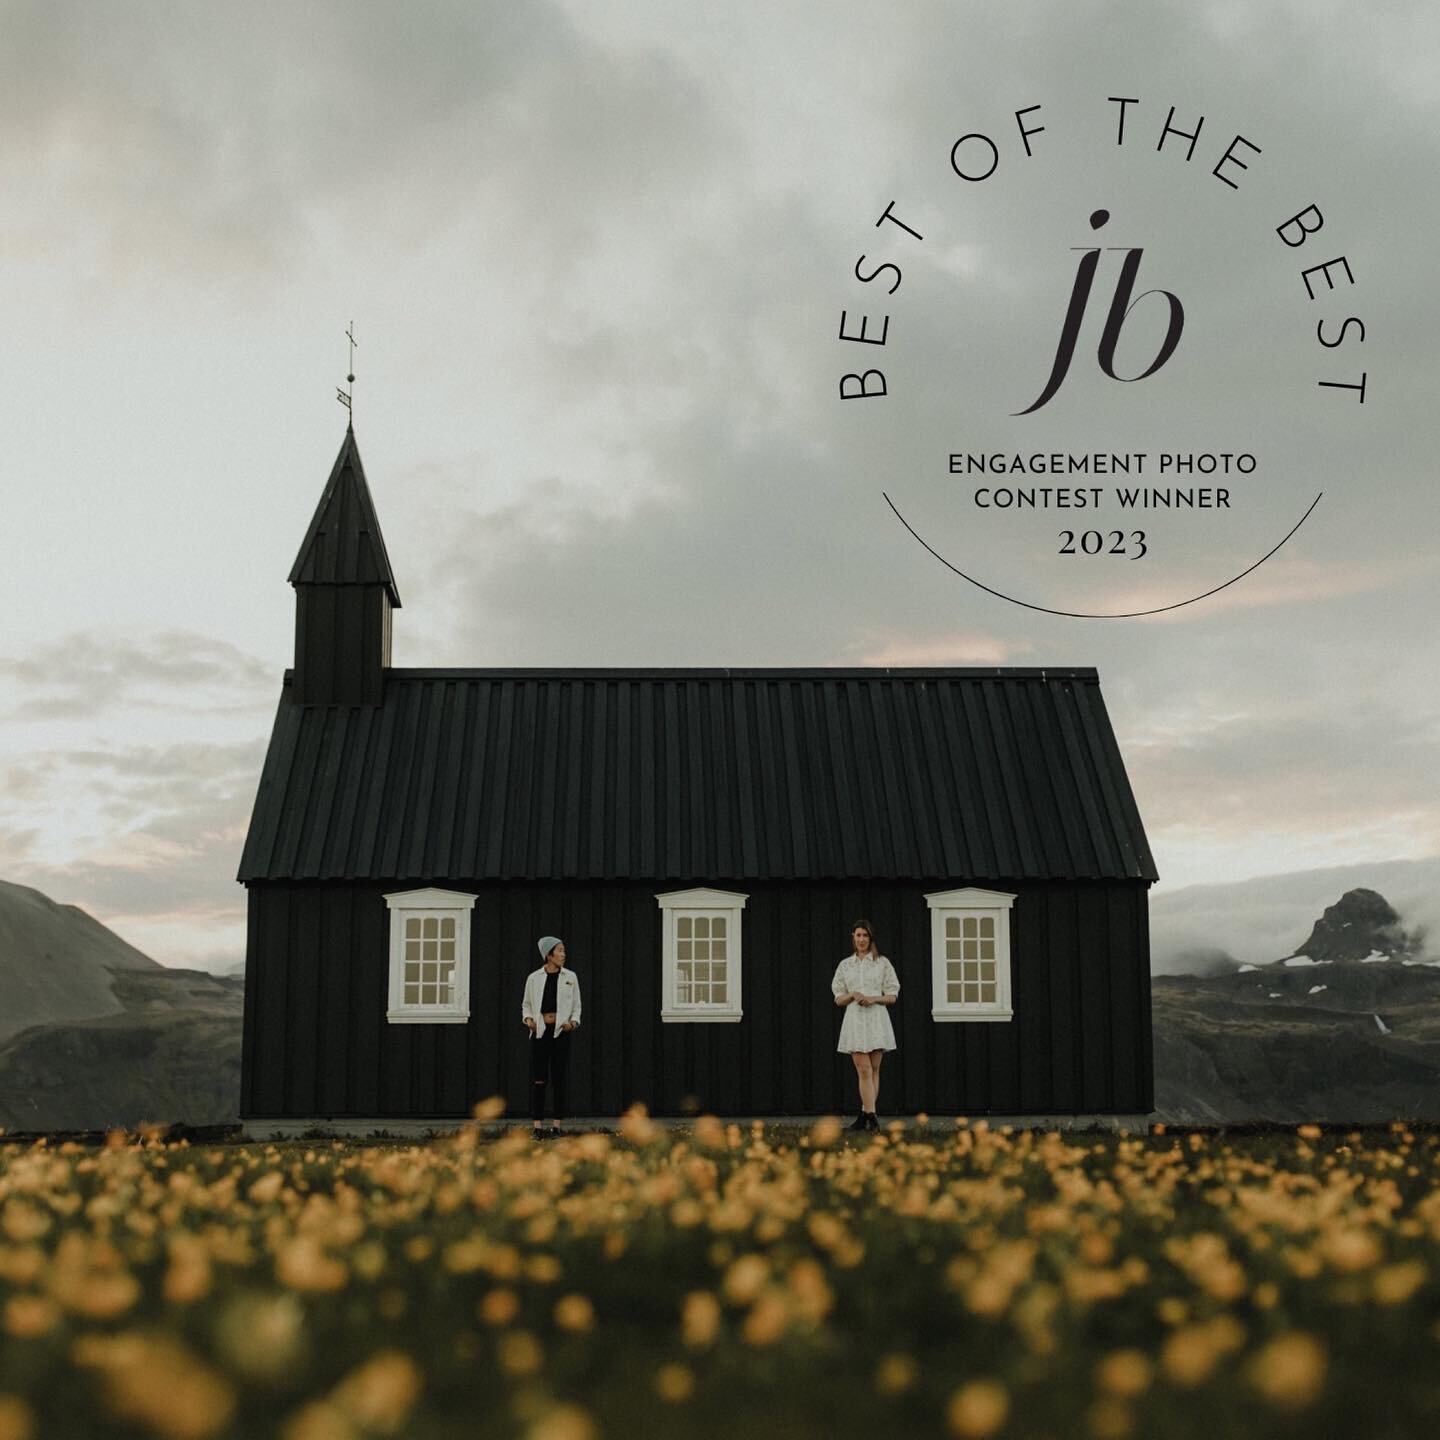 Happy Monday!!

So very excited (and a little late in sharing) that this image of Amanda + Katelyn in Iceland made @junebugweddings 50 best engagement photos of the year!!! Incredibly honoured to be included amongst a collection of really amazing ima